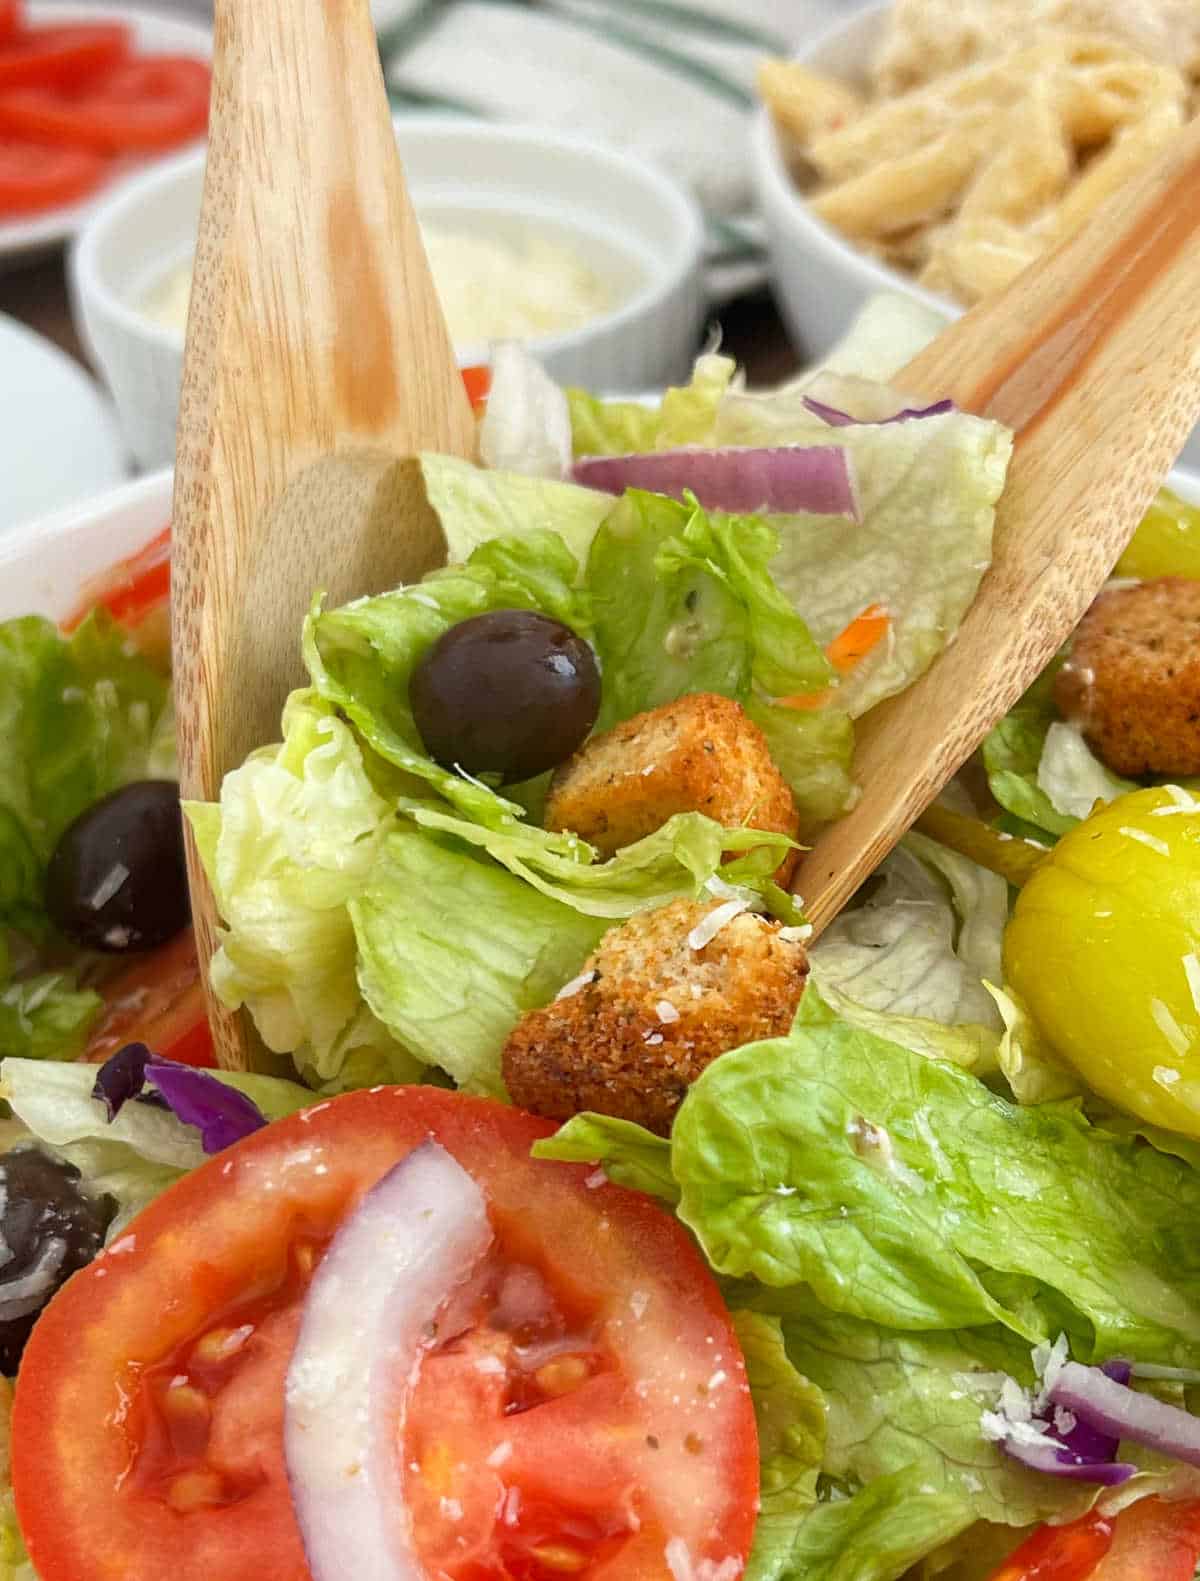 toss salad with wooden serving spoon and fork.